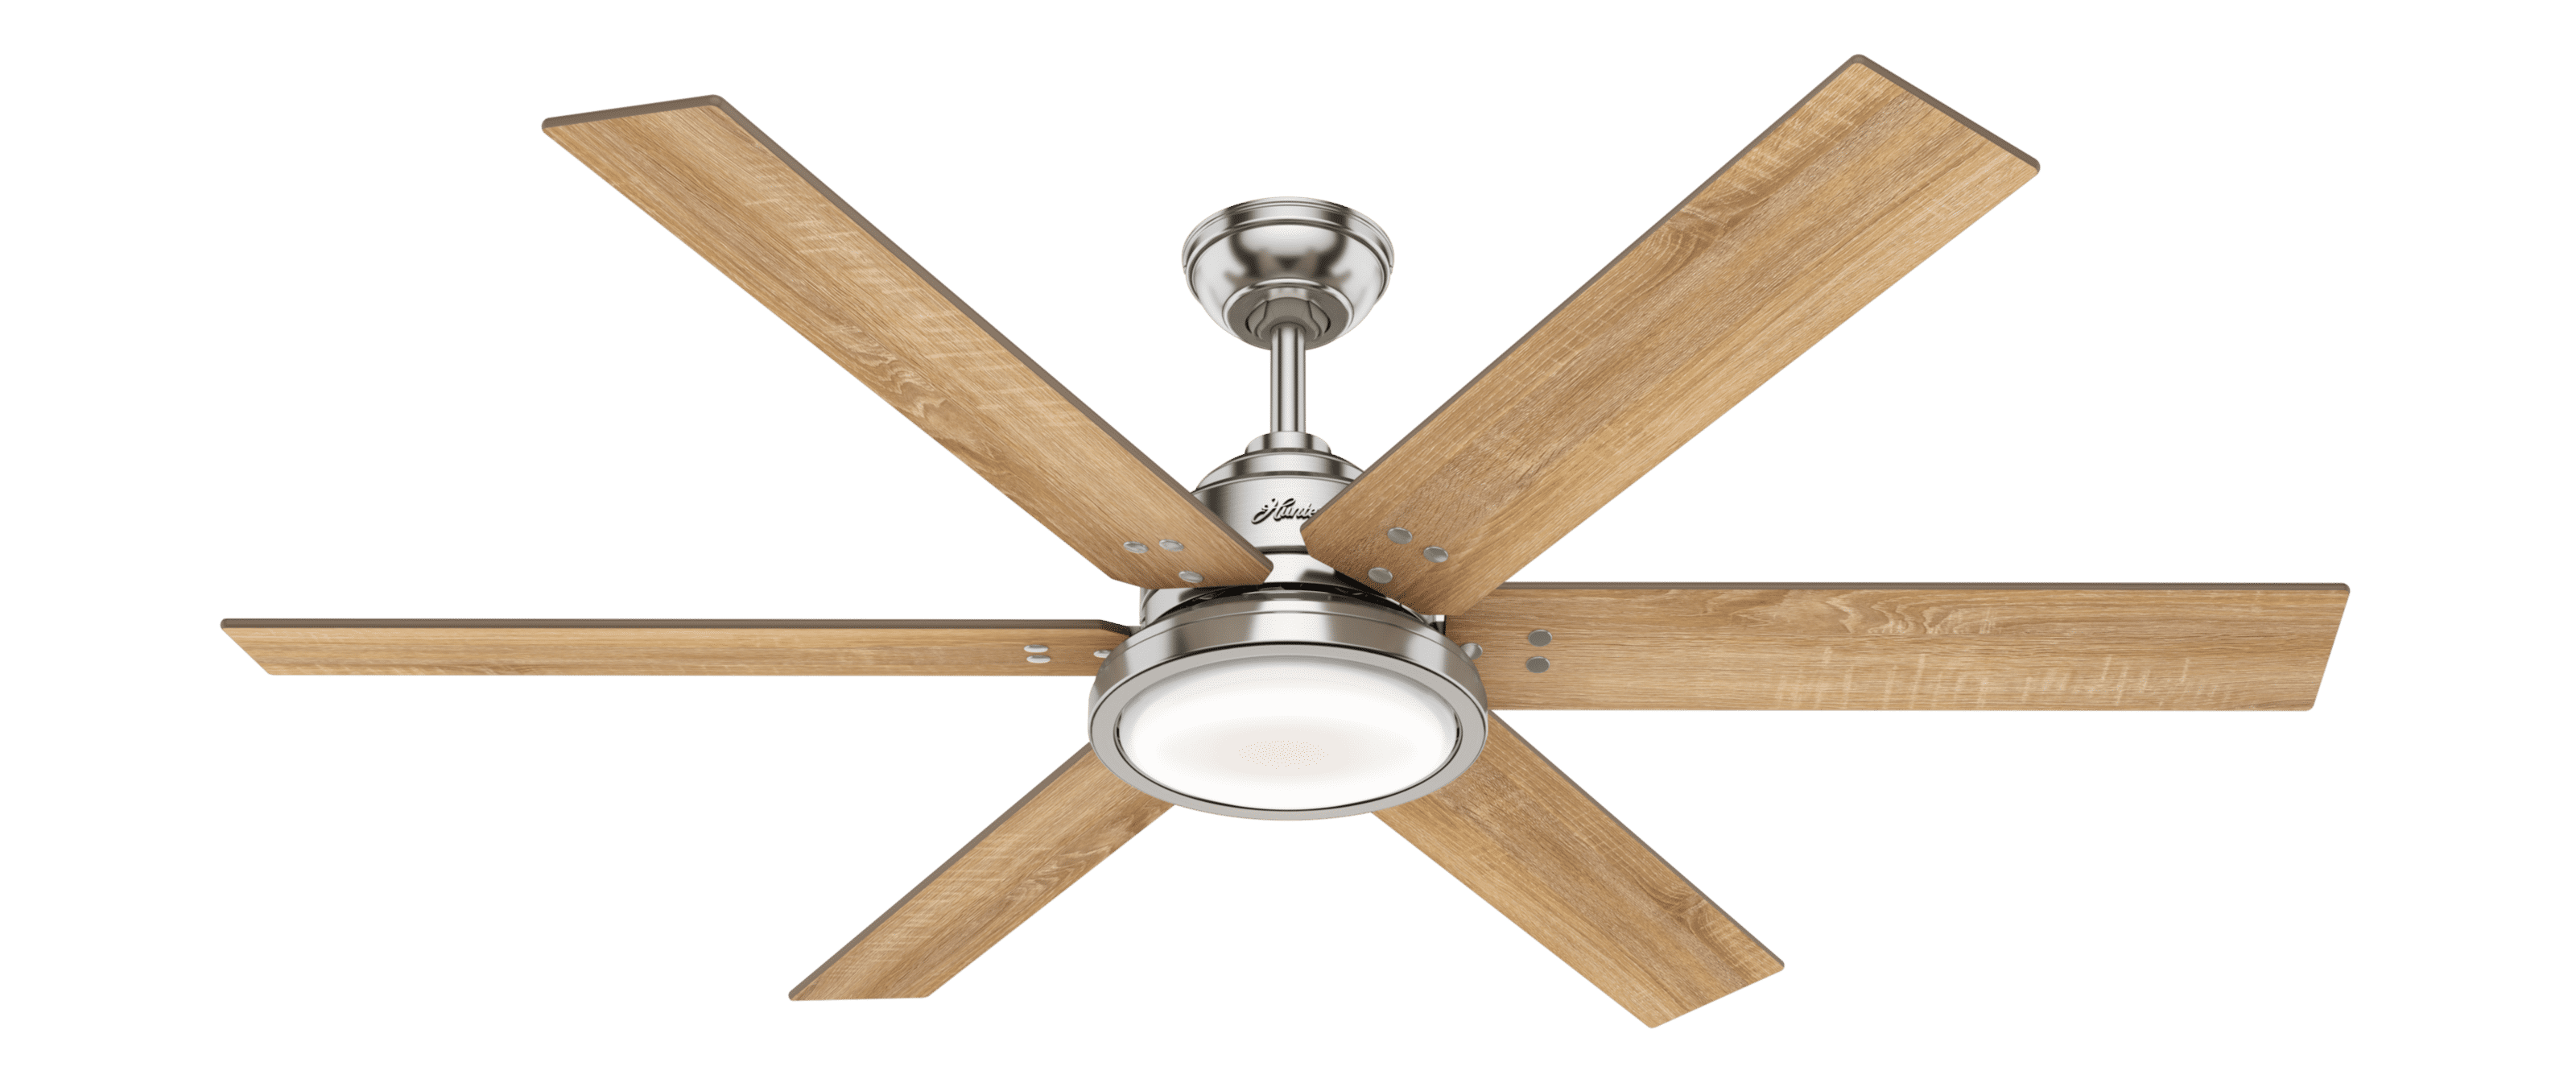 Hunter 60" Rustic Farmhouse Ceiling Fan with LED Light, Nickel Finish